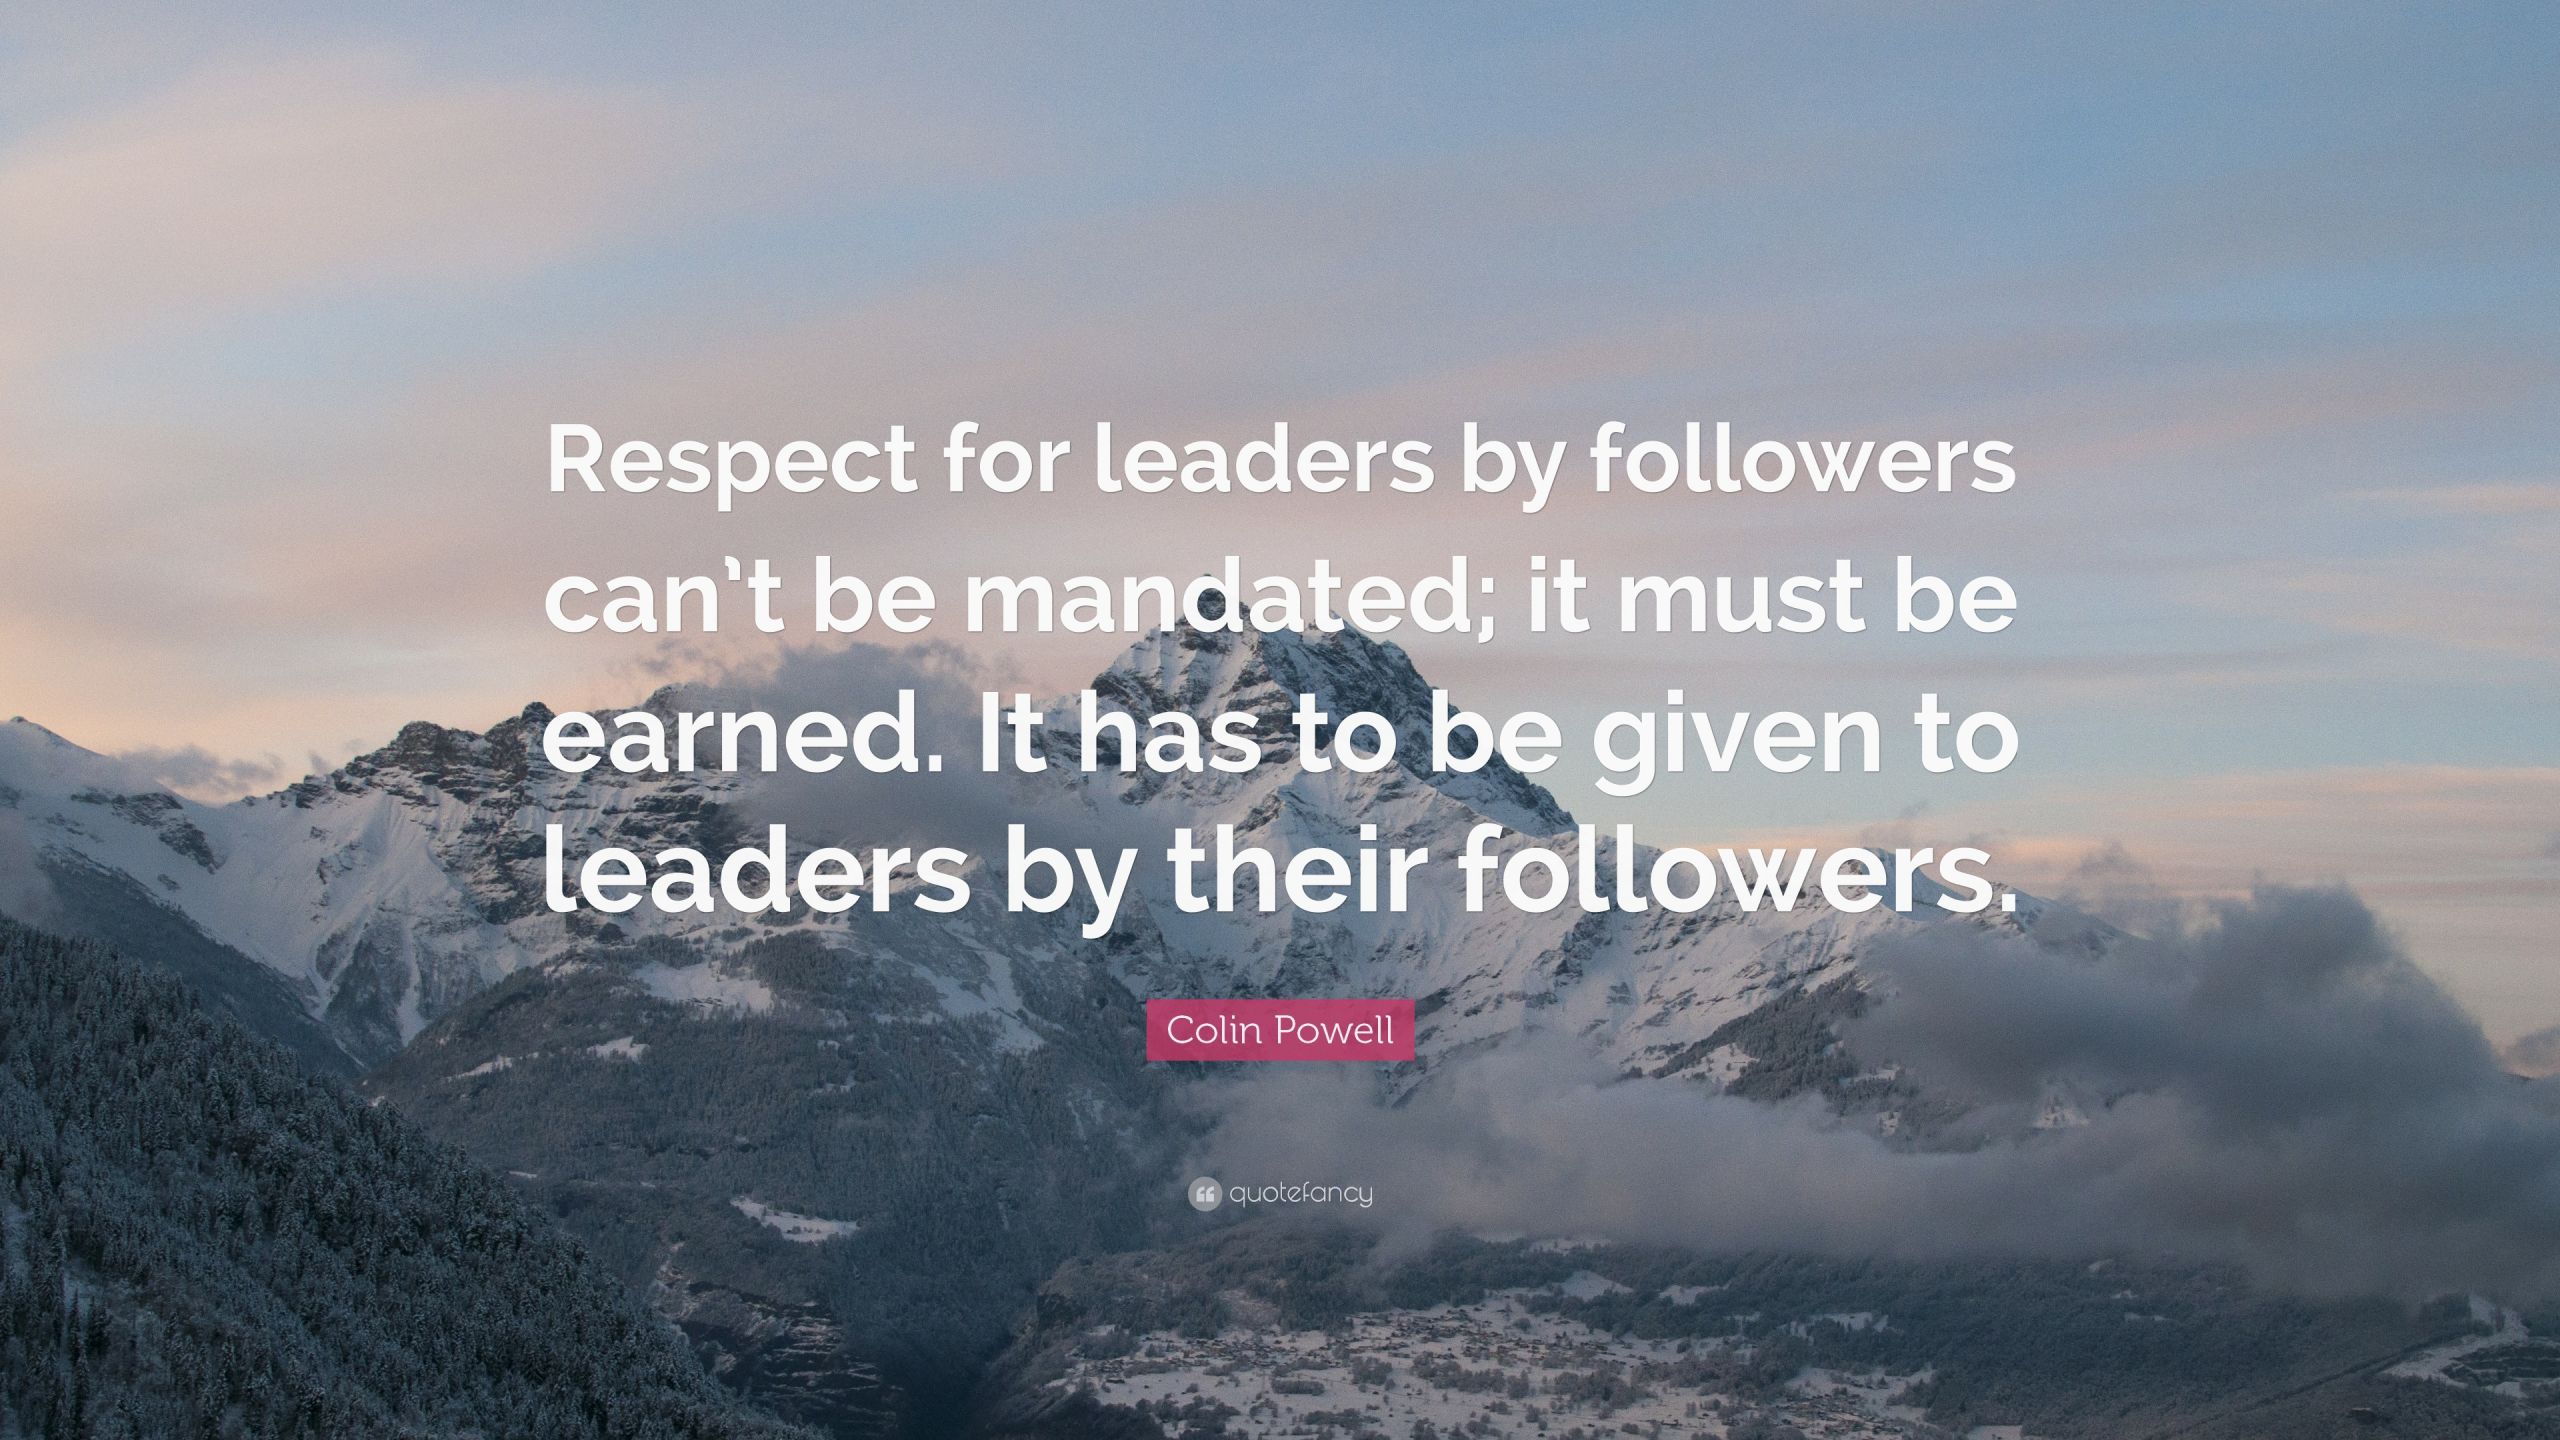 Colin Powell Quote Leadership
 Colin Powell Quote “Respect for leaders by followers can